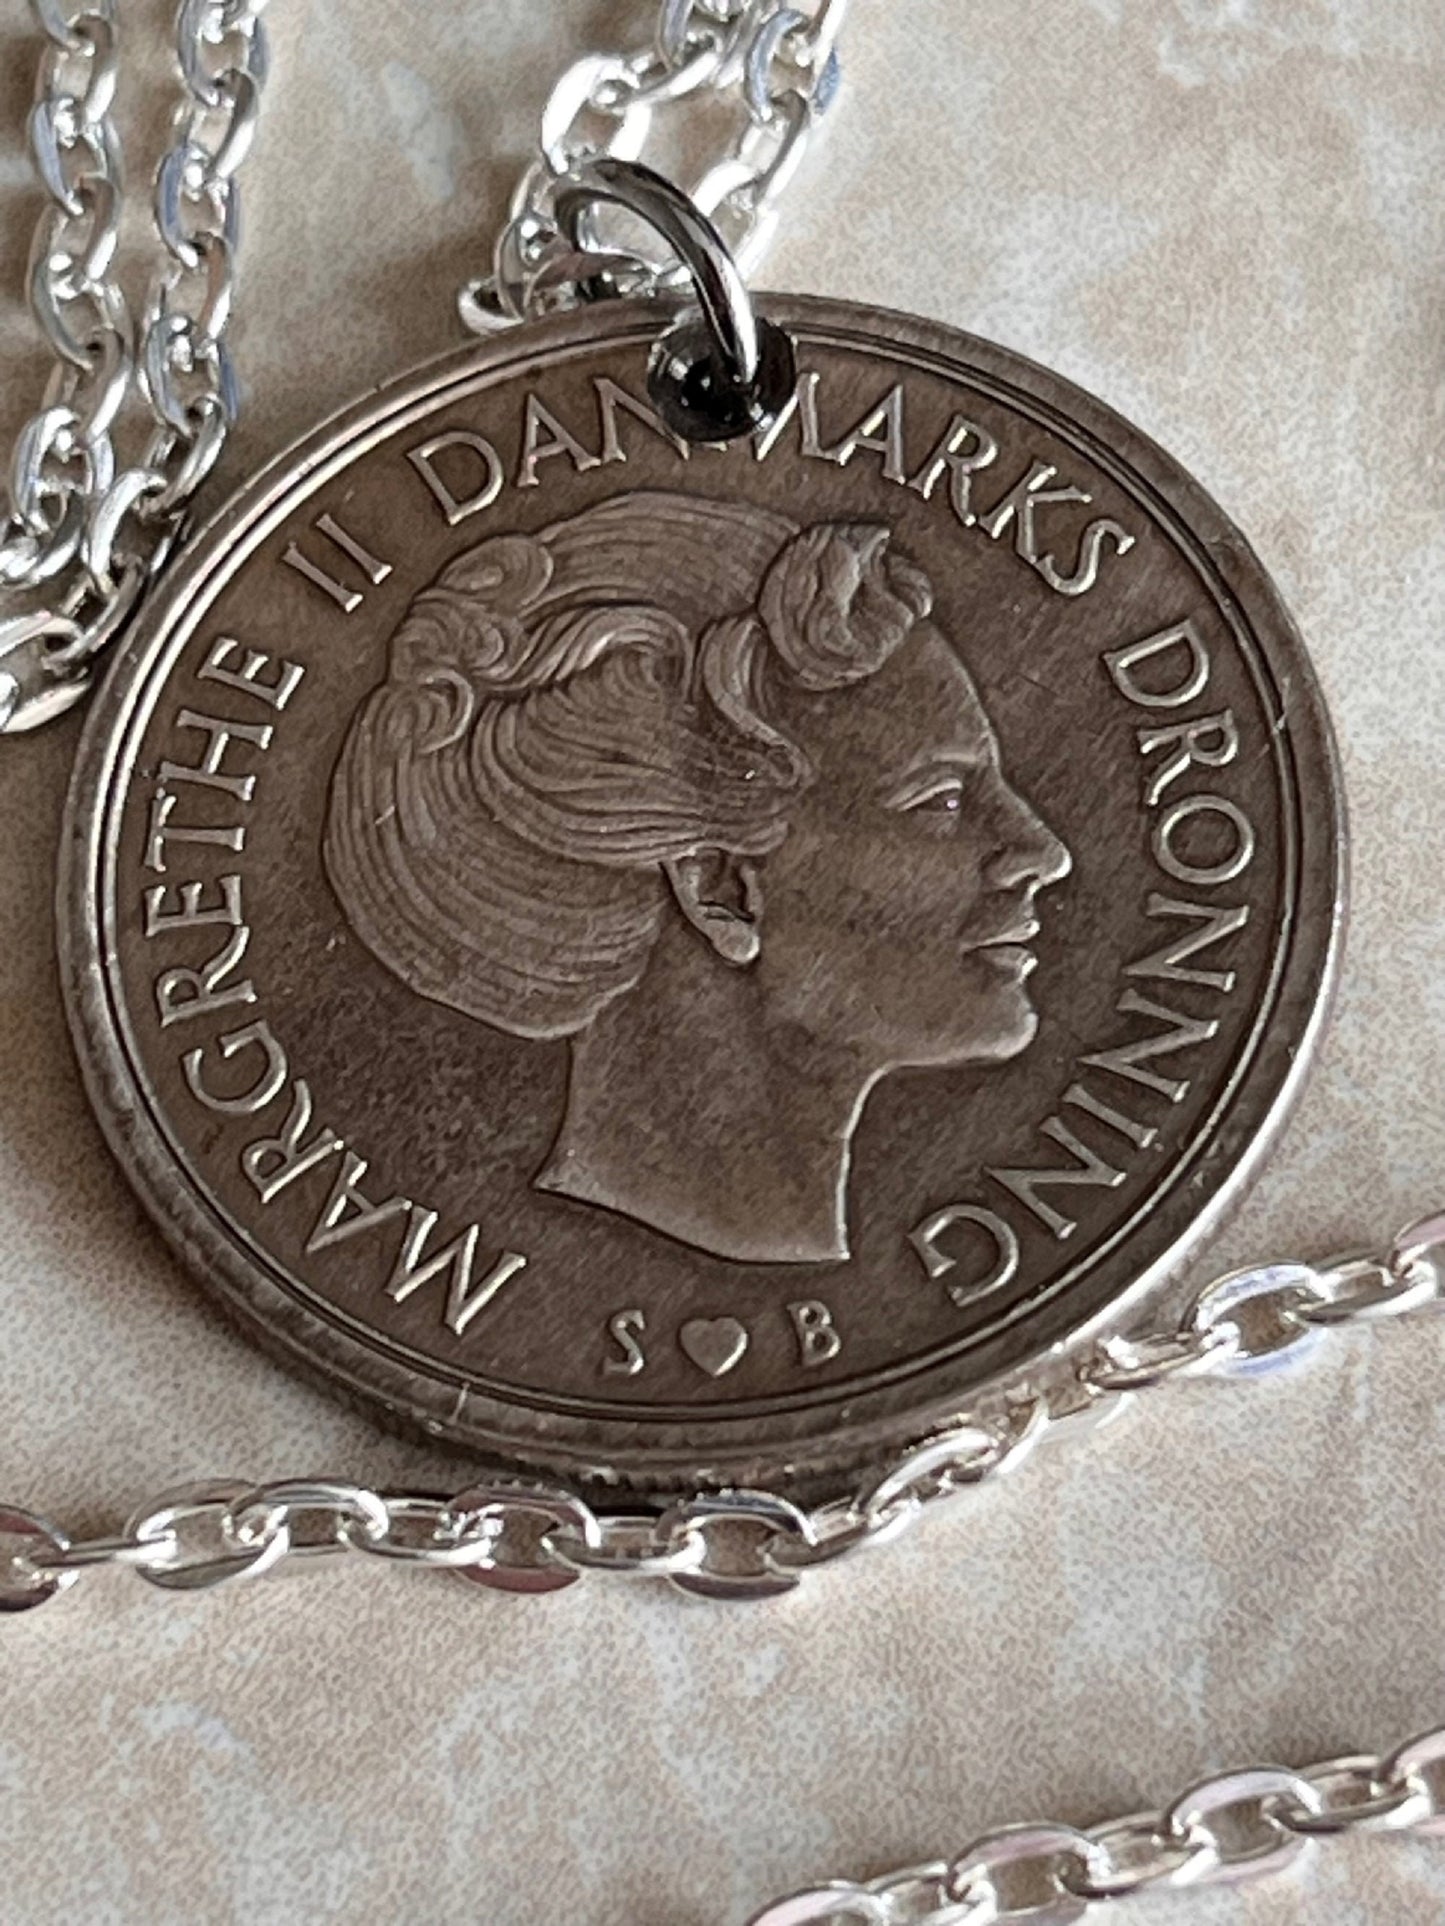 Denmark Coin Pendant 5 Kroners Danish Personal Necklace Old Vintage Handmade Jewelry Gift Friend Charm For Him Her World Coin Collector